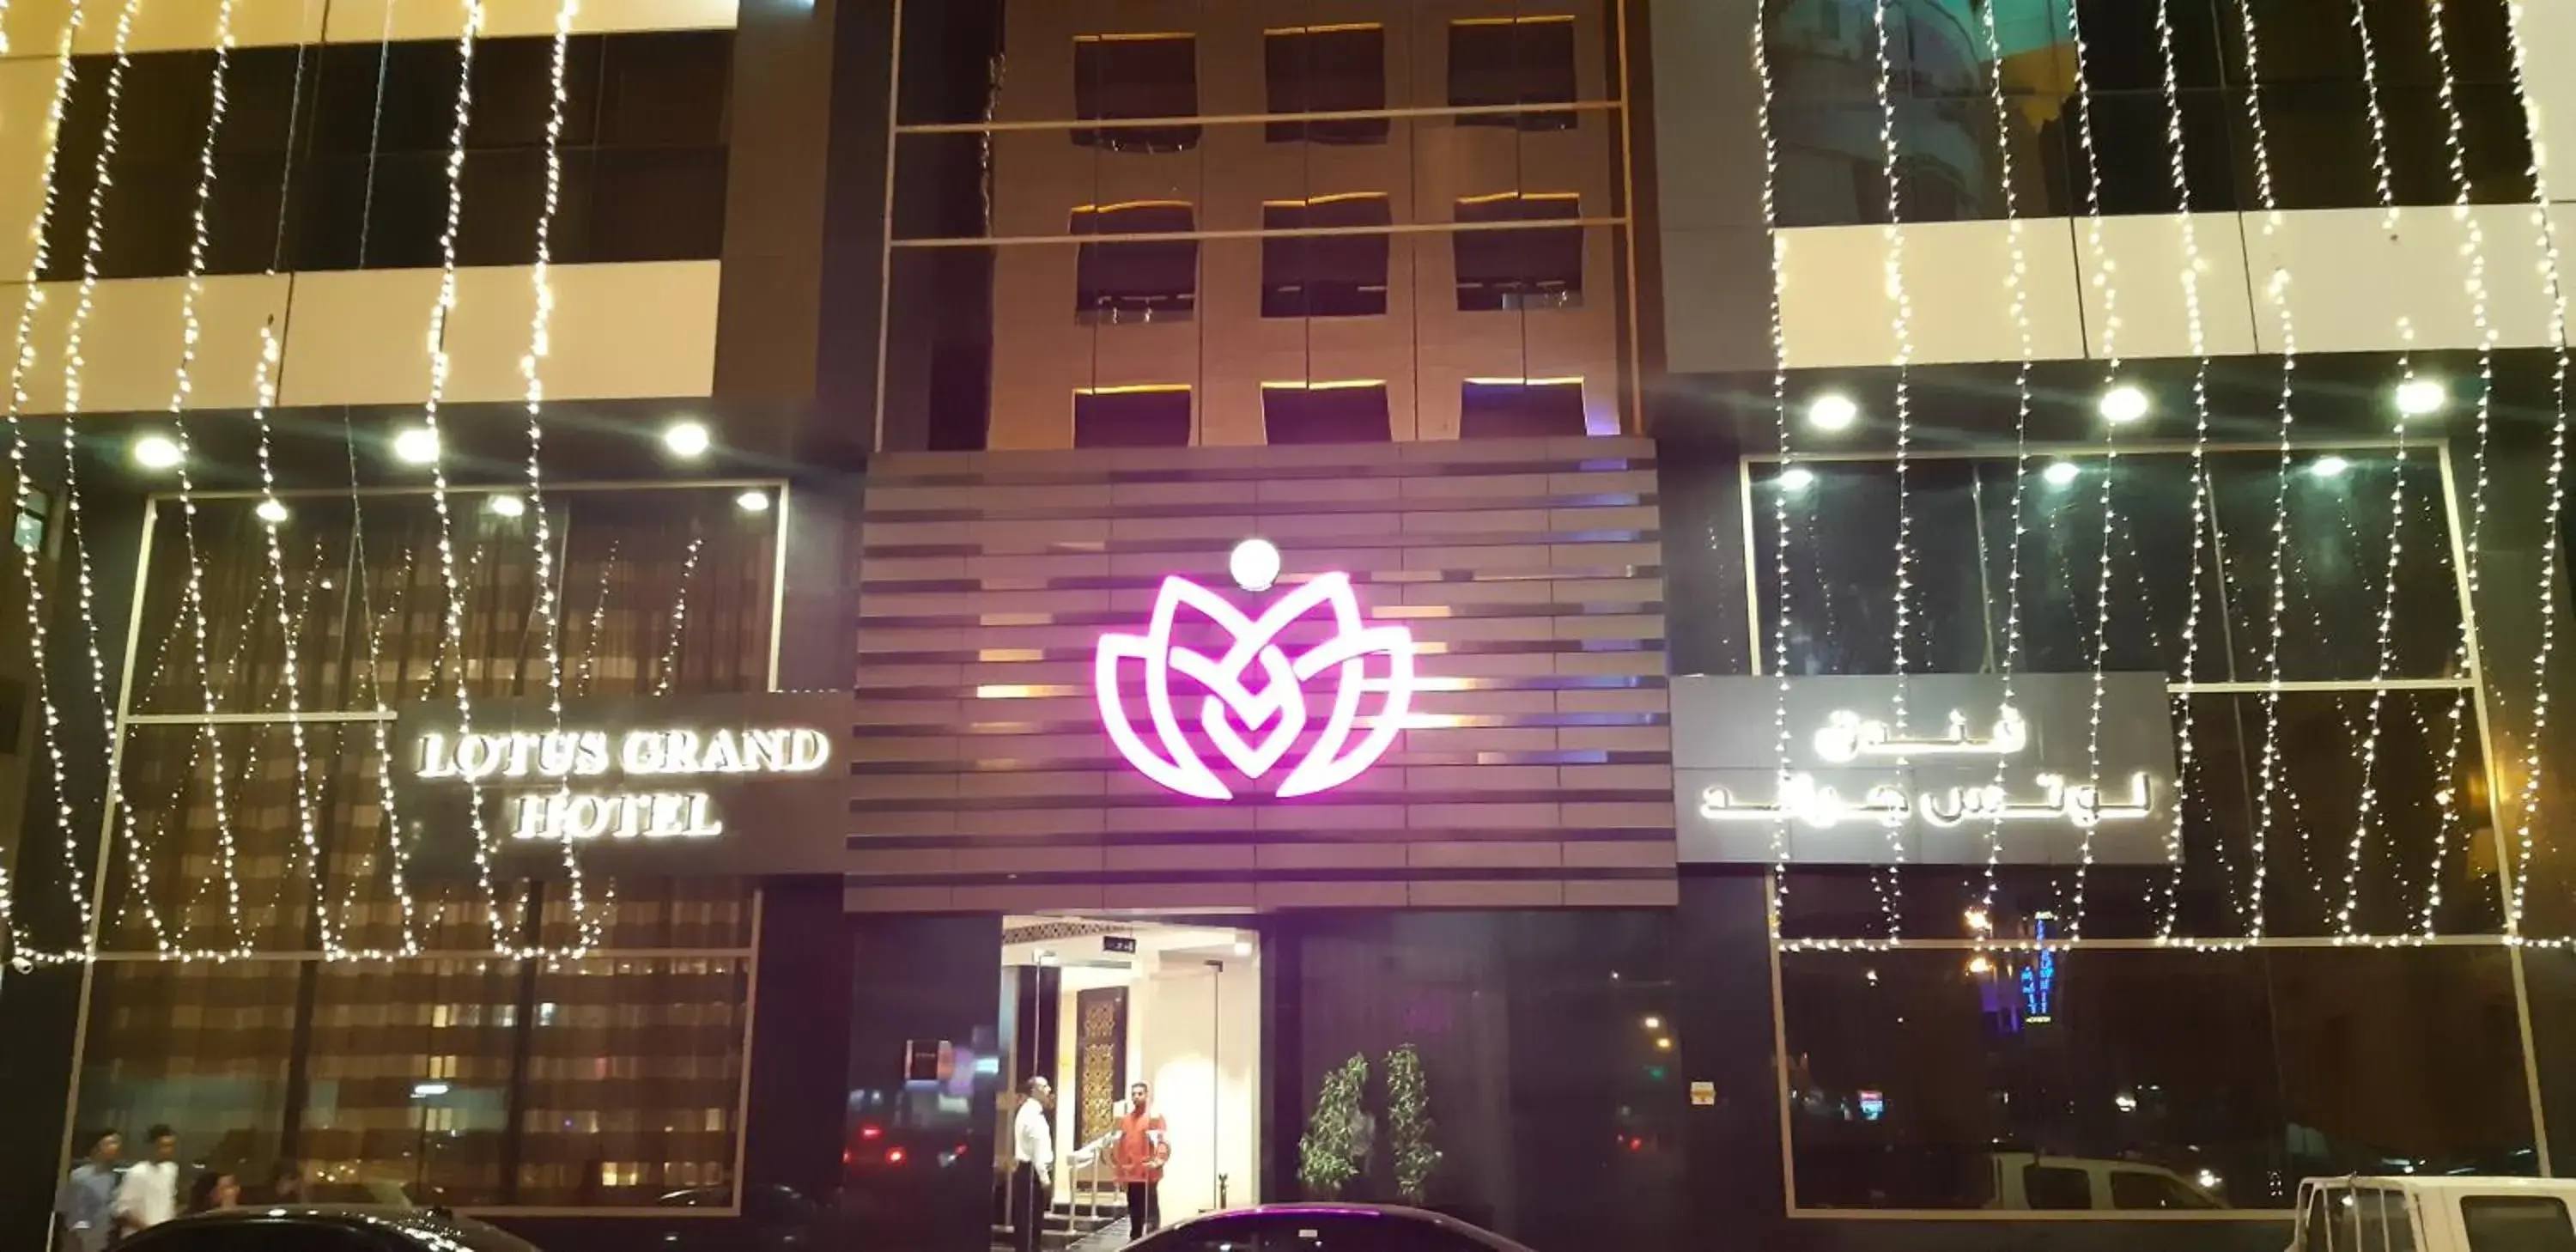 Property Building in Lotus Grand Hotel